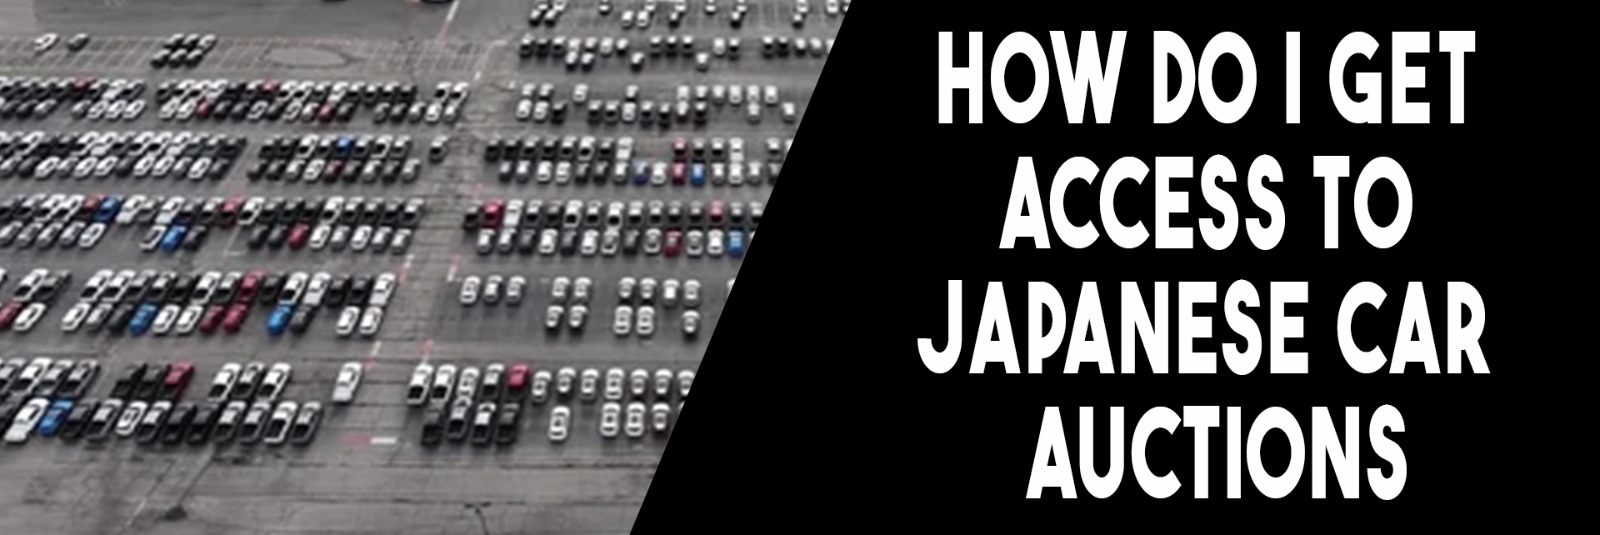 How do I get access to Japanese car auctions?